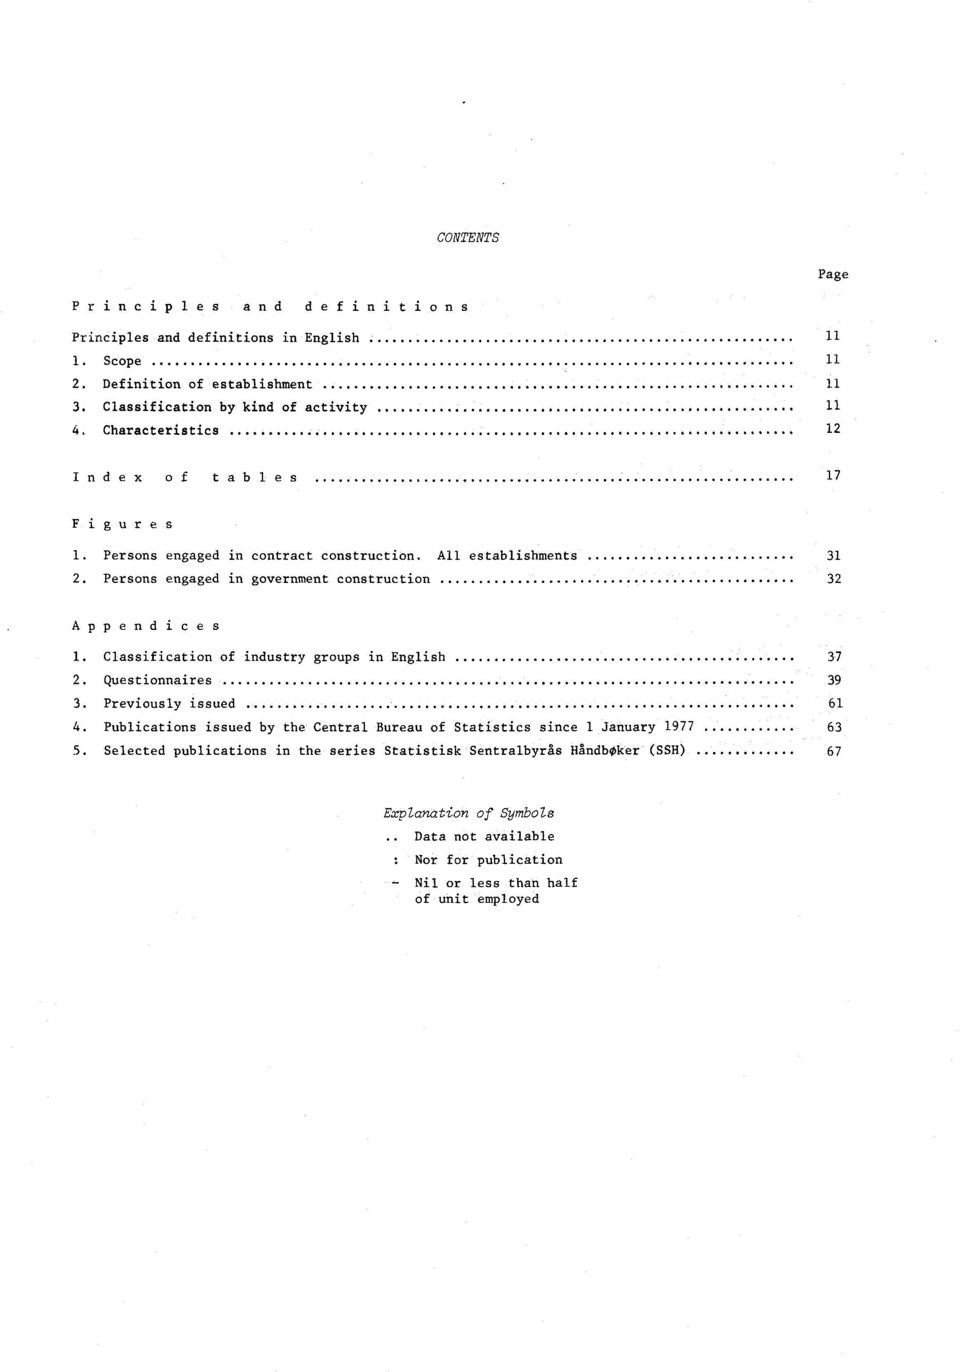 Persons engaged in government construction 32 Appendices 1. Classification of industry groups in English 37 2. Questionnaires 39 3. Previously issued 61 4.